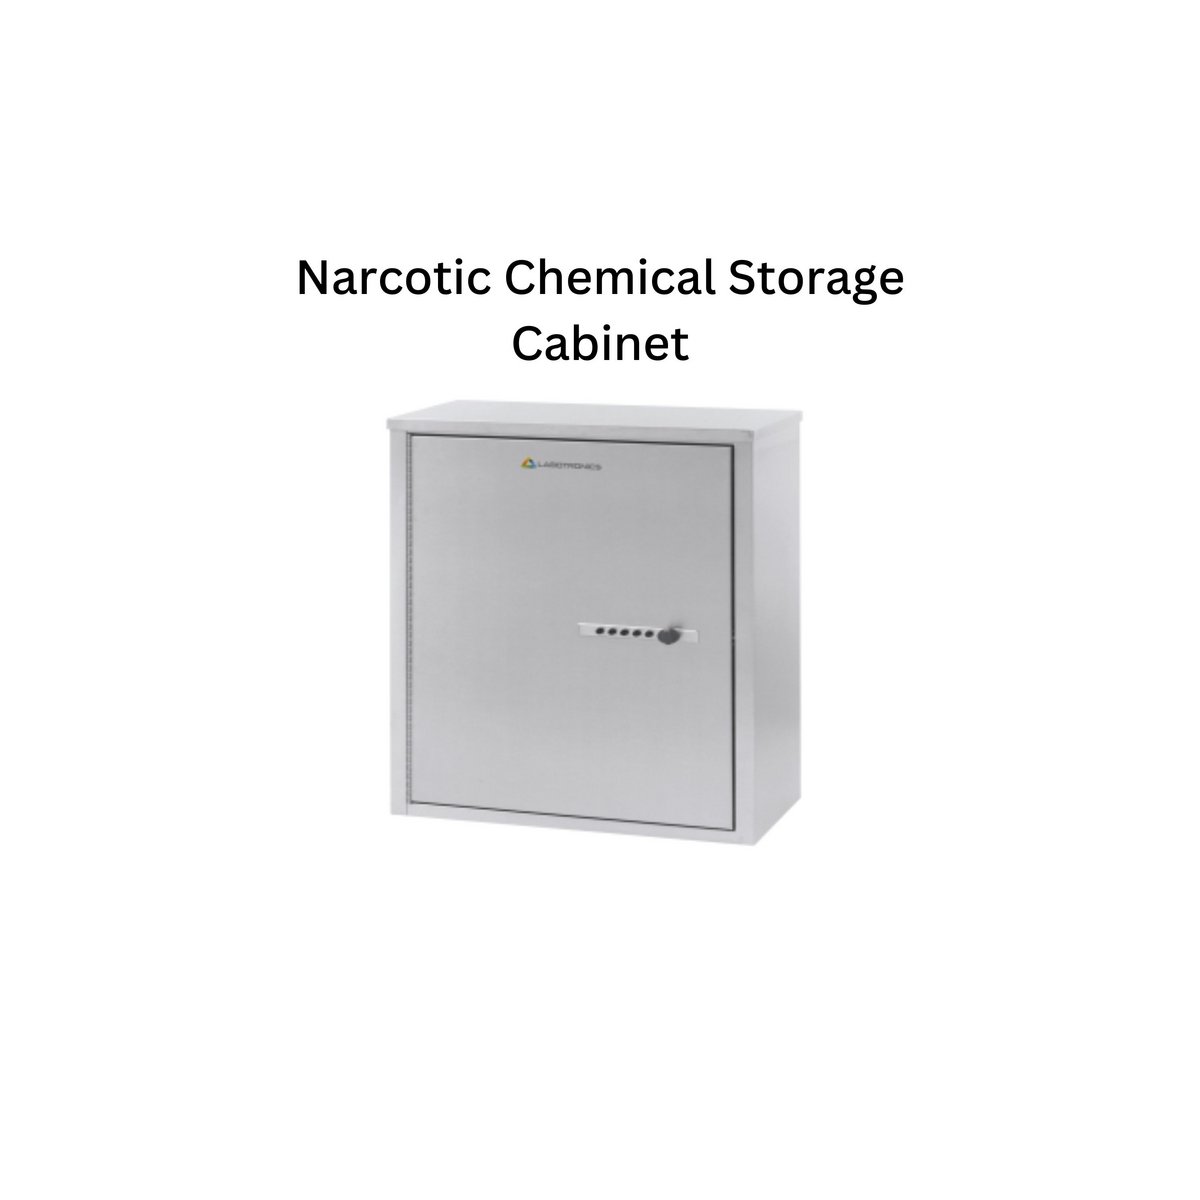 Narcotic Chemical Storage Cabinet .jpg